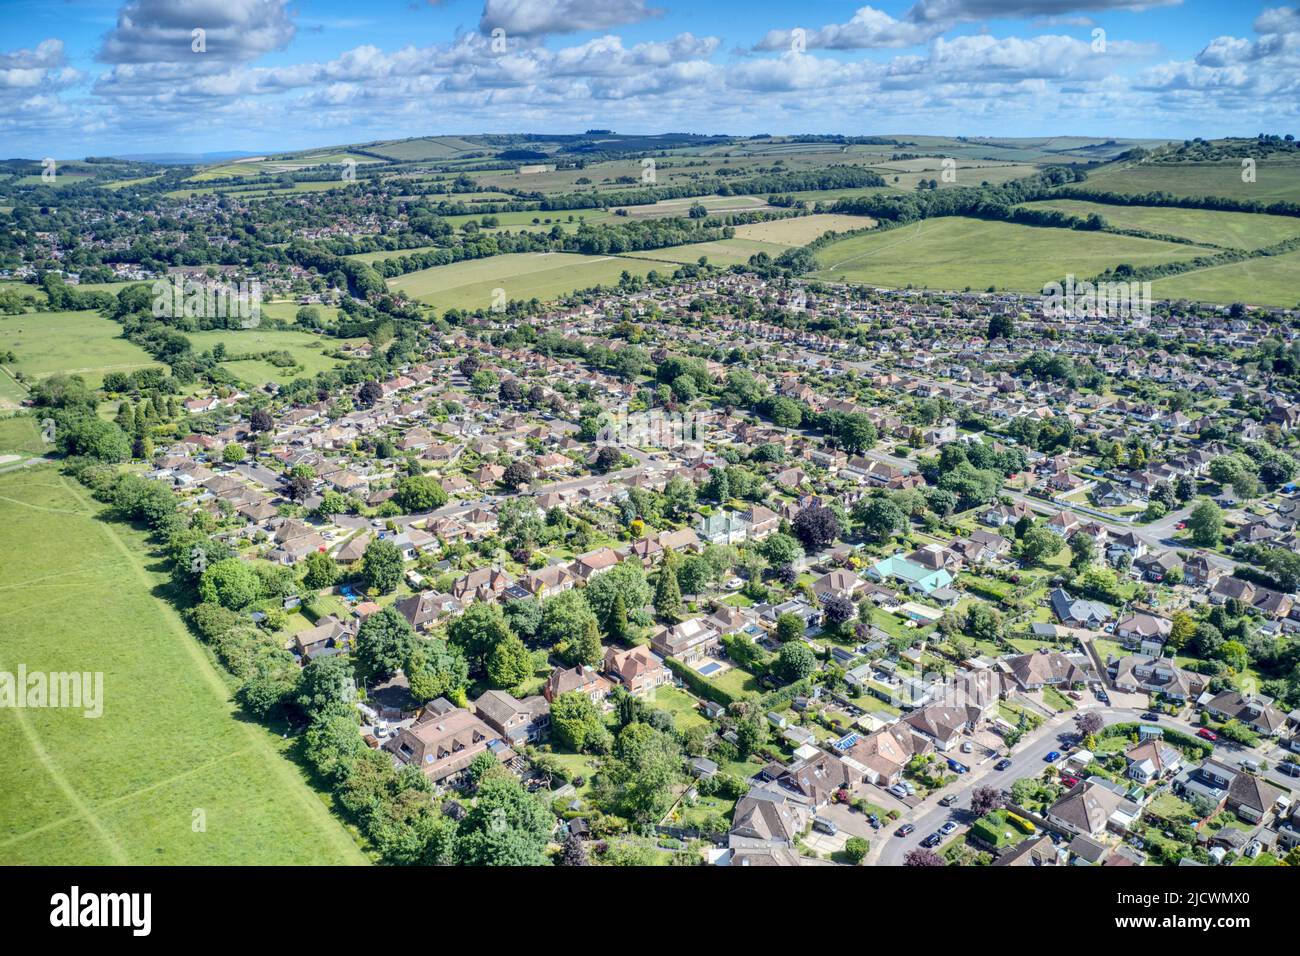 Aerial photo of the Findon valley between the South Downs and the beautiful countryside of West Sussex in England. Stock Photo